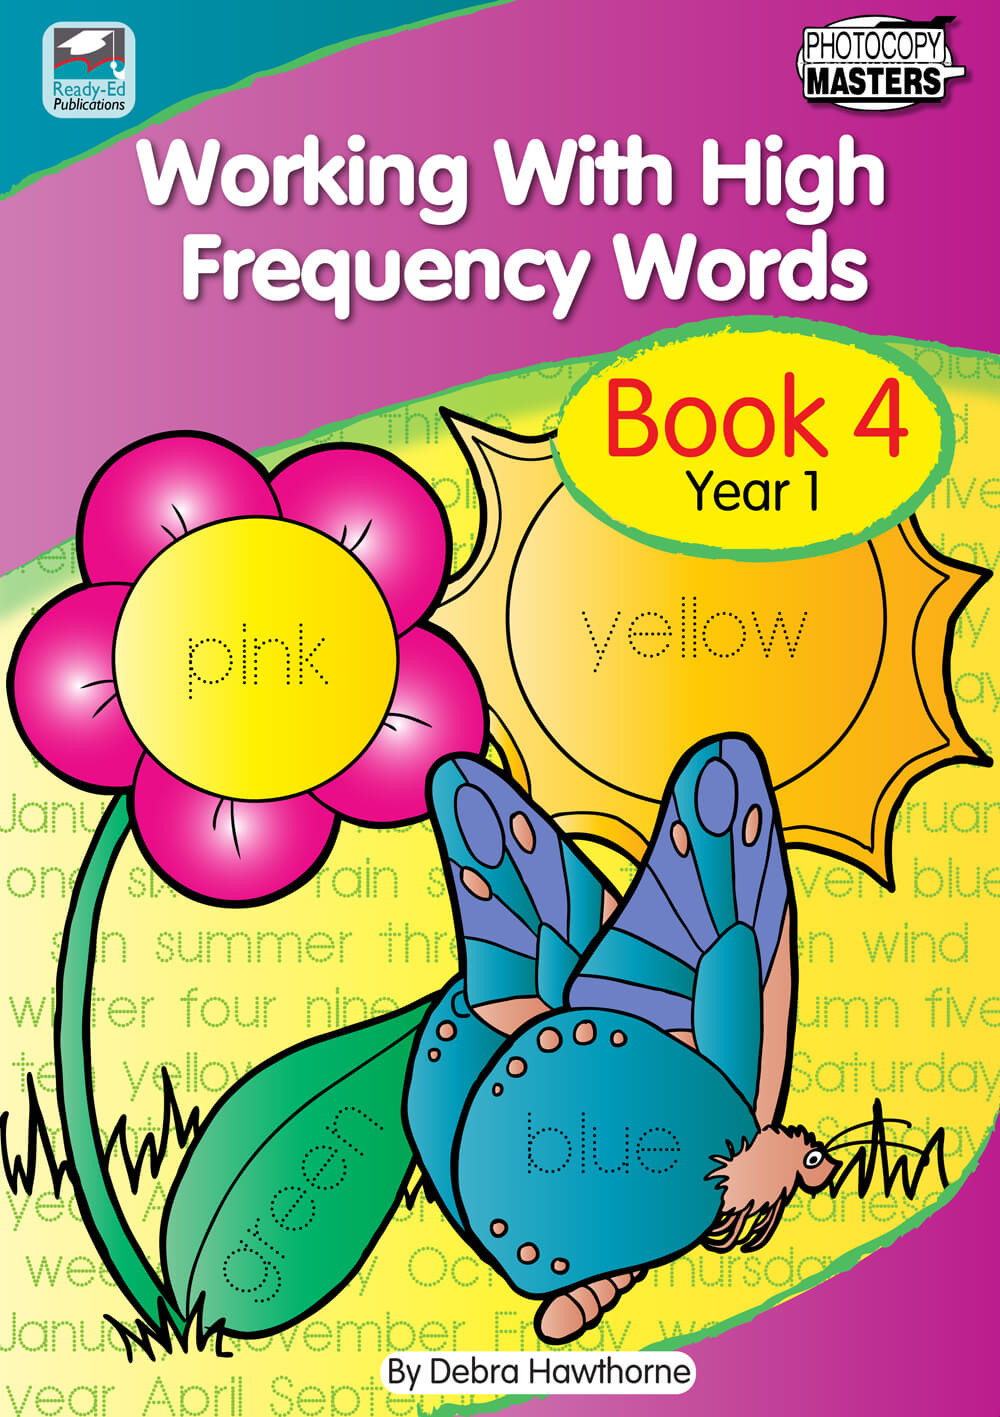 working-with-high-frequency-words-book-4-teaching-resources-new-zealand